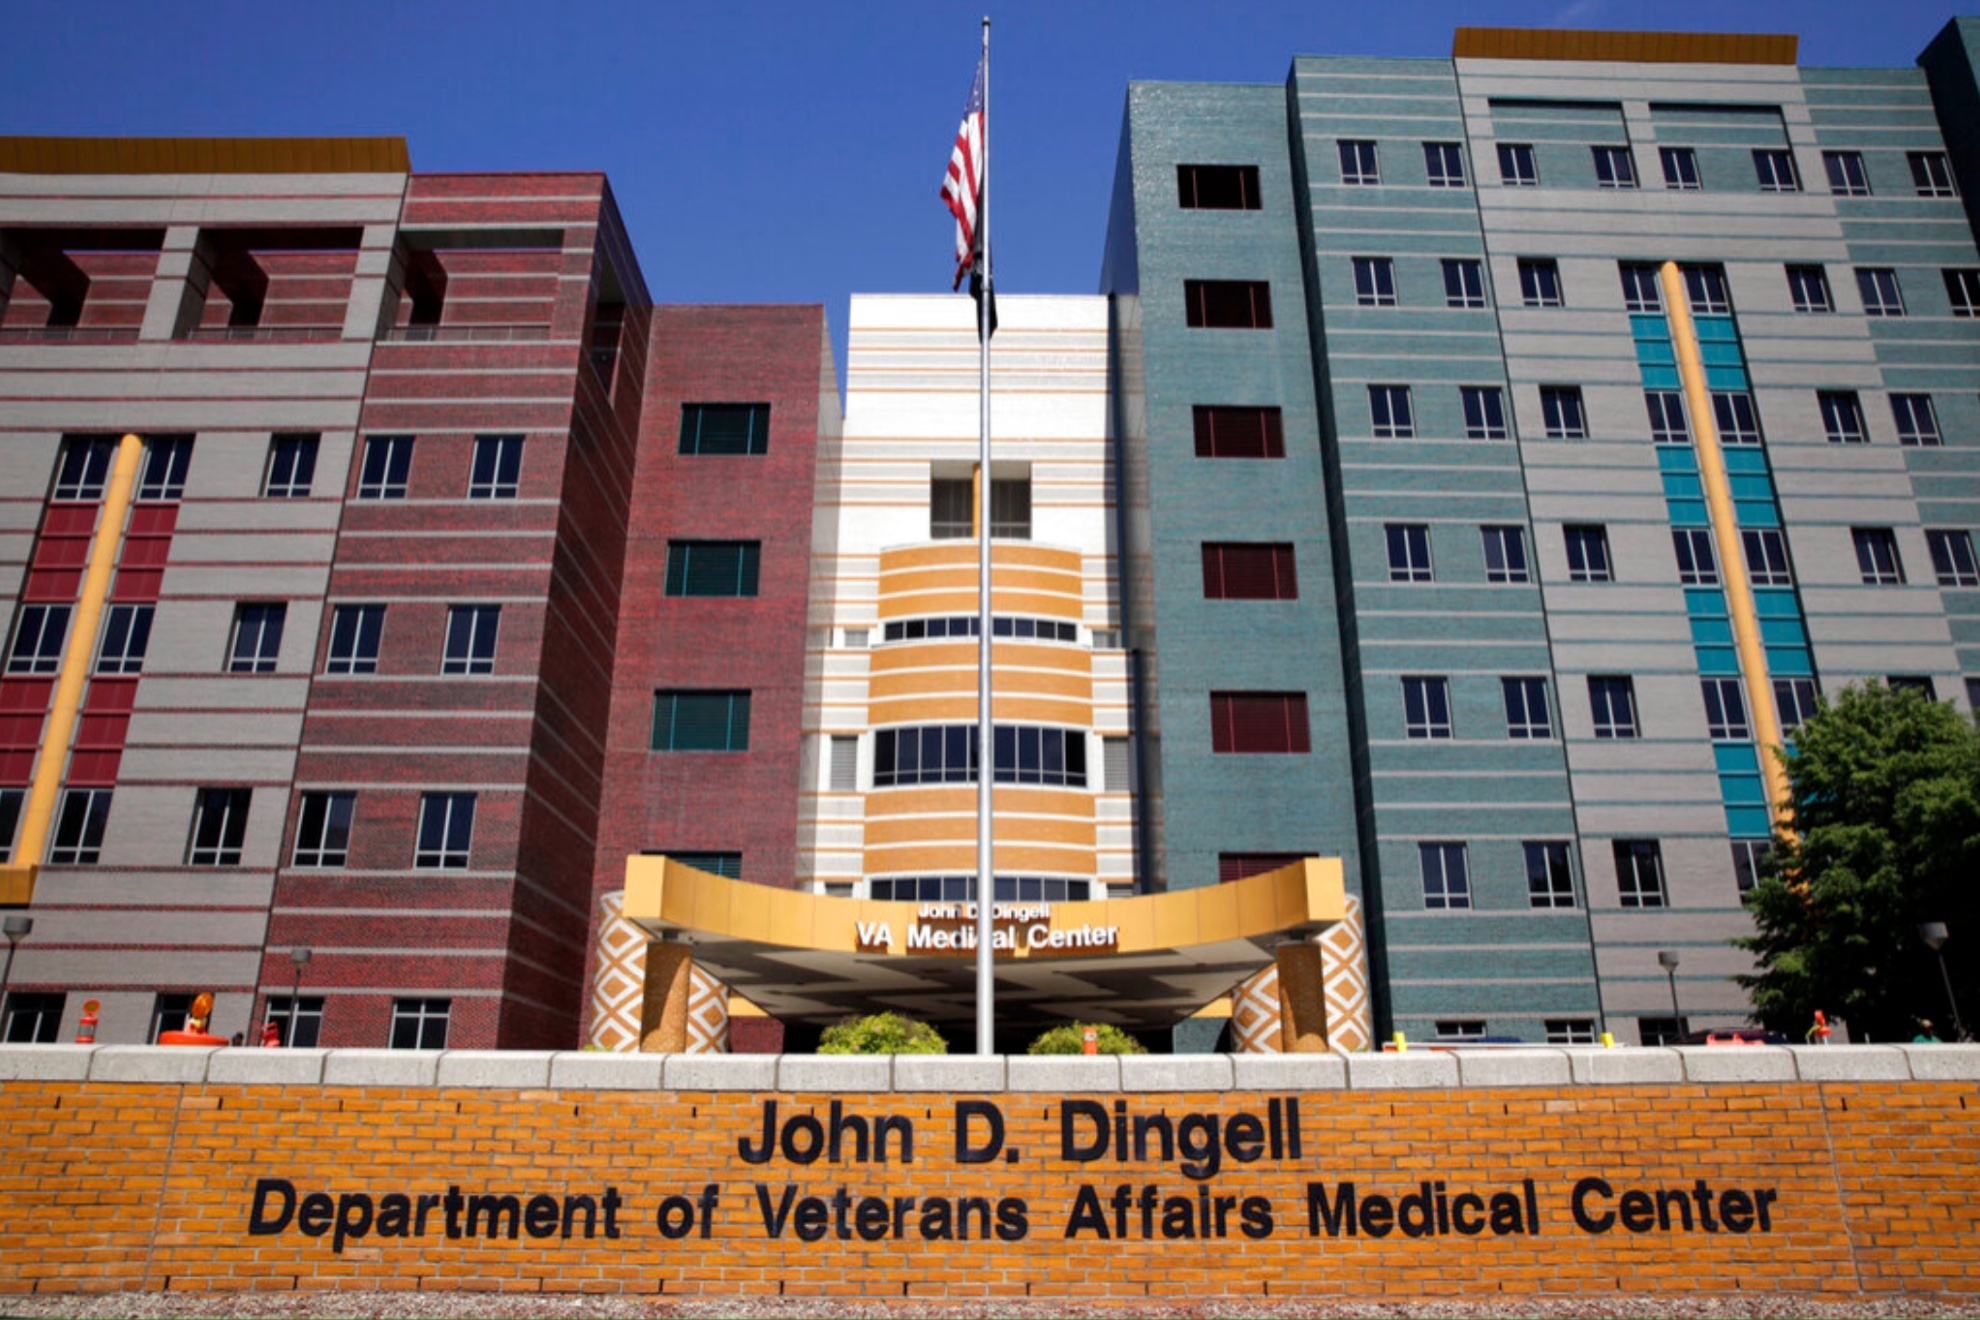 Veterans will receive treatment for exposure to toxic environments.